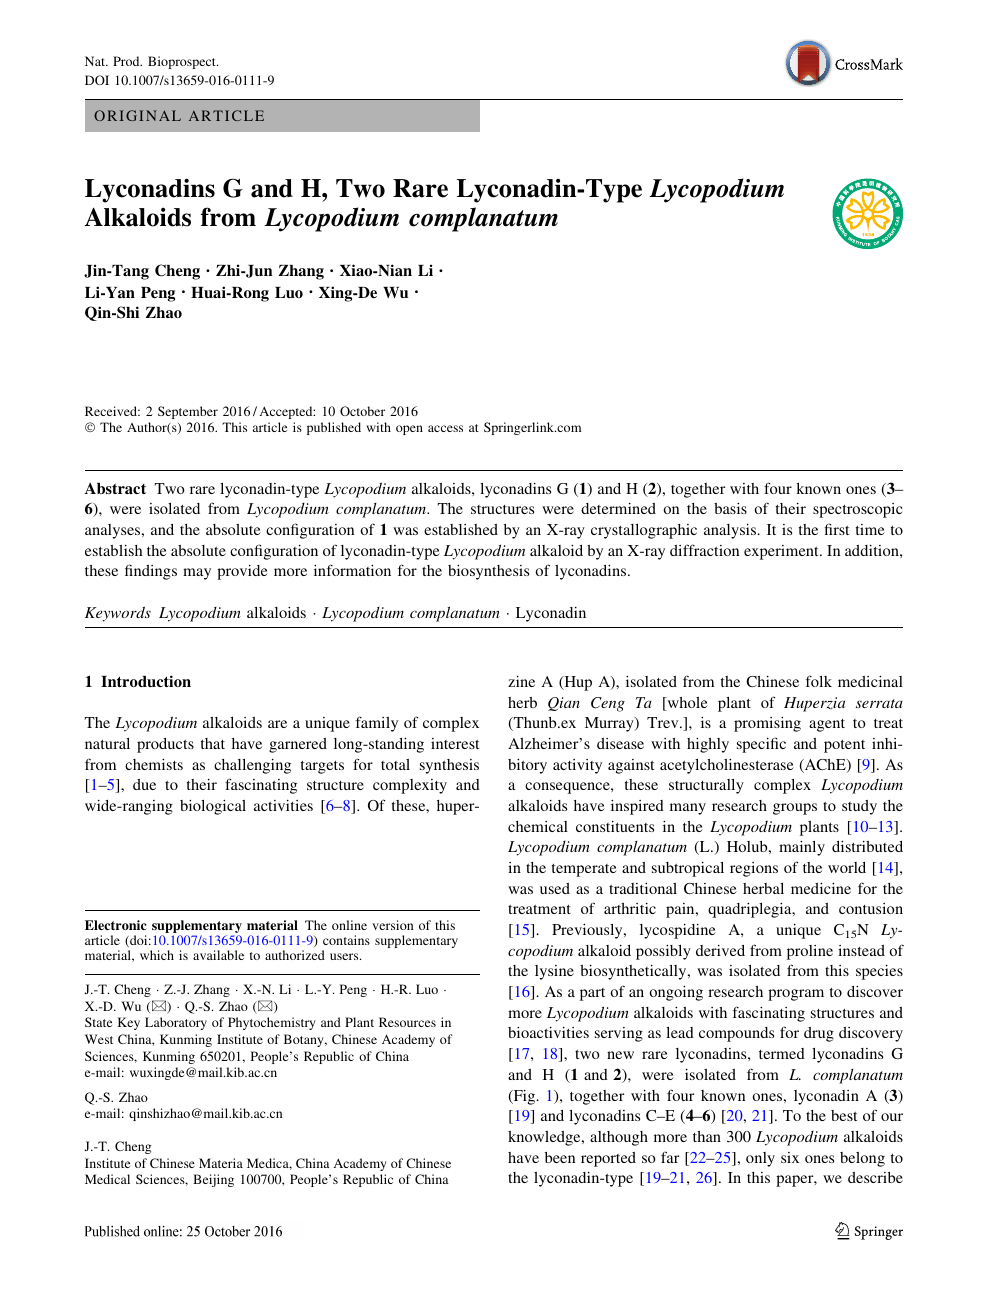 Lyconadins G And H Two Rare Lyconadin Type Lycopodium Alkaloids From Lycopodium Complanatum Topic Of Research Paper In Chemical Sciences Download Scholarly Article Pdf And Read For Free On Cyberleninka Open Science